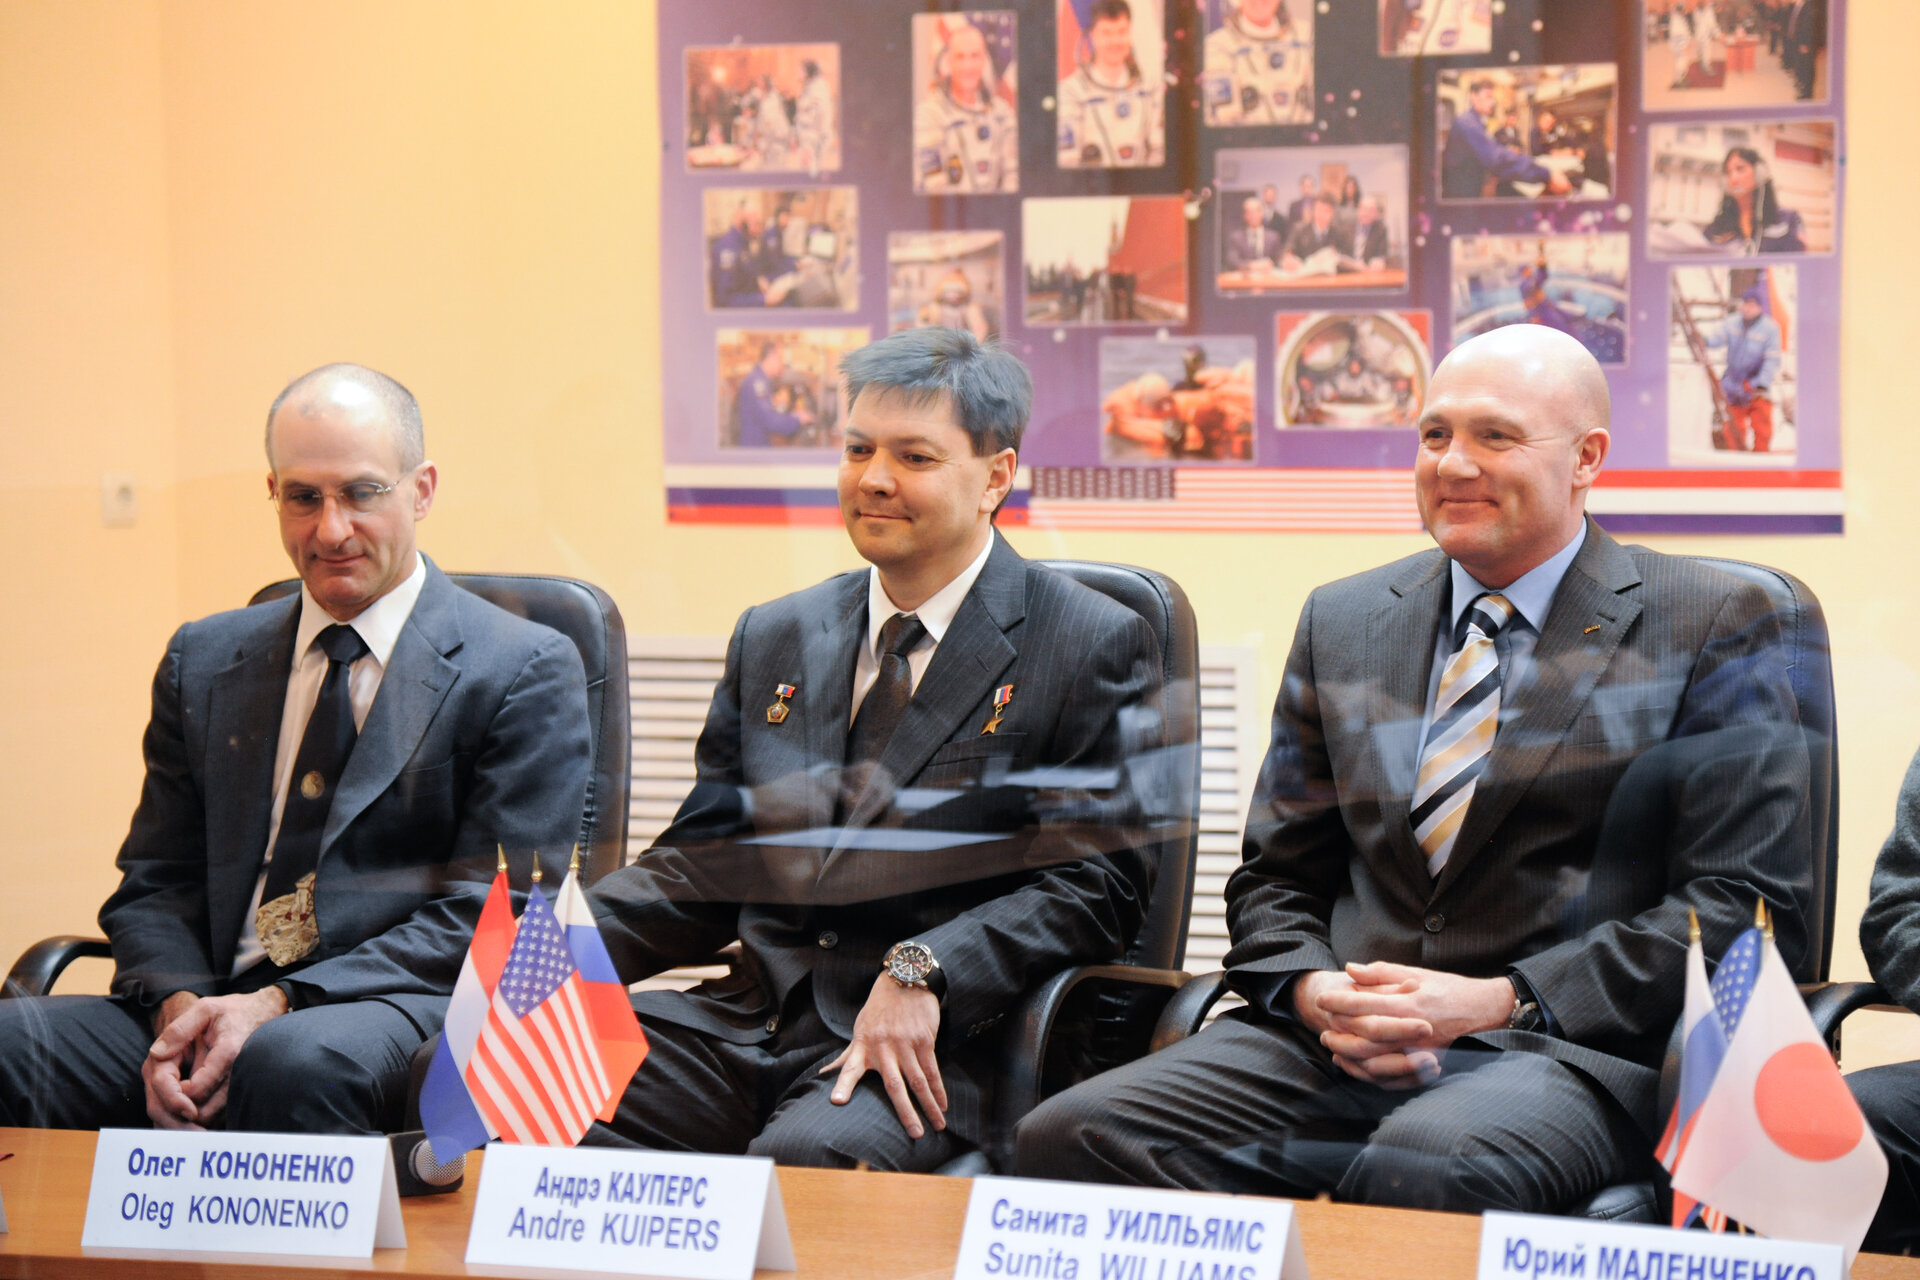 Expedition 30/31 crew members during the Russian State Commission